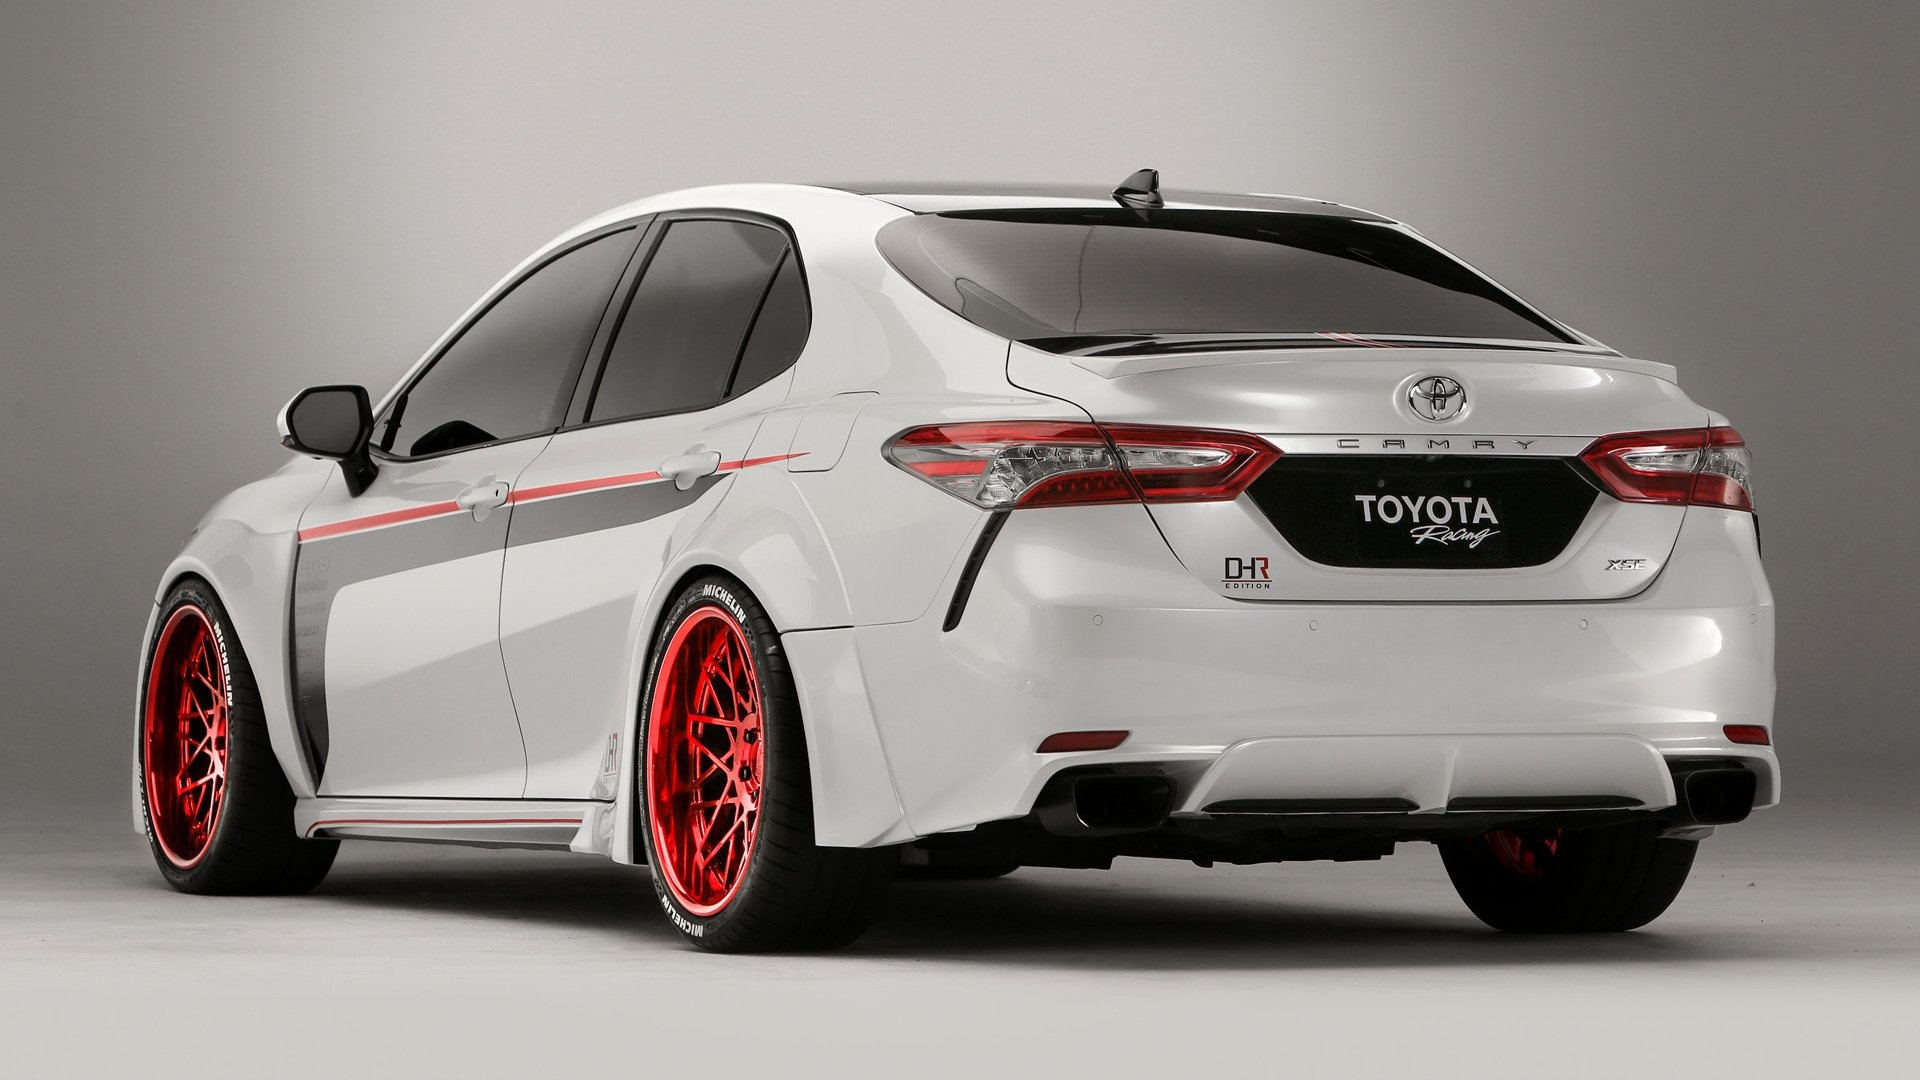 Toyota Camry TRD, Top free backgrounds, 1920x1080 Full HD Desktop